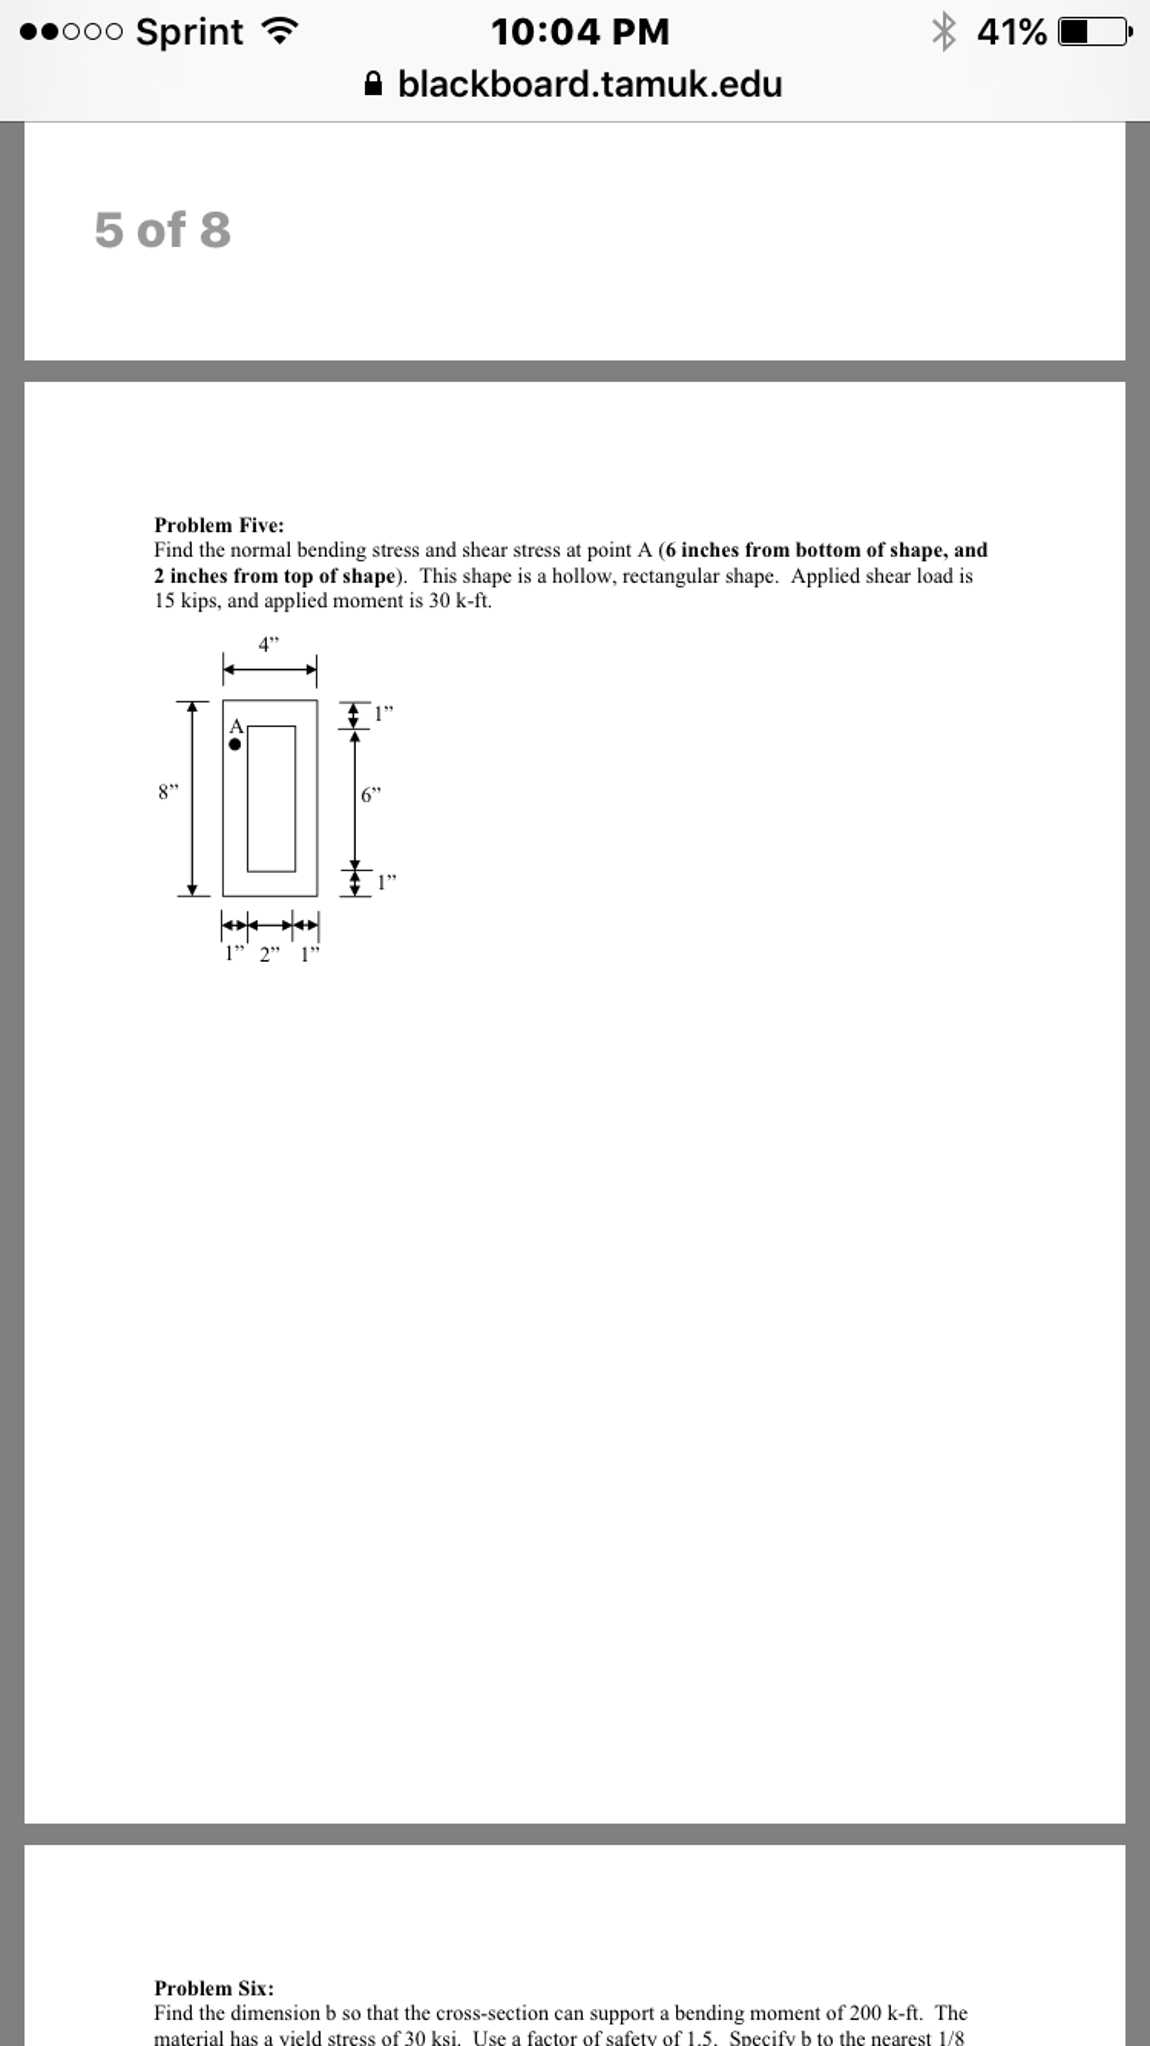 Linear Motion Problems Worksheet together with Civil Engineering Archive November 12 2016